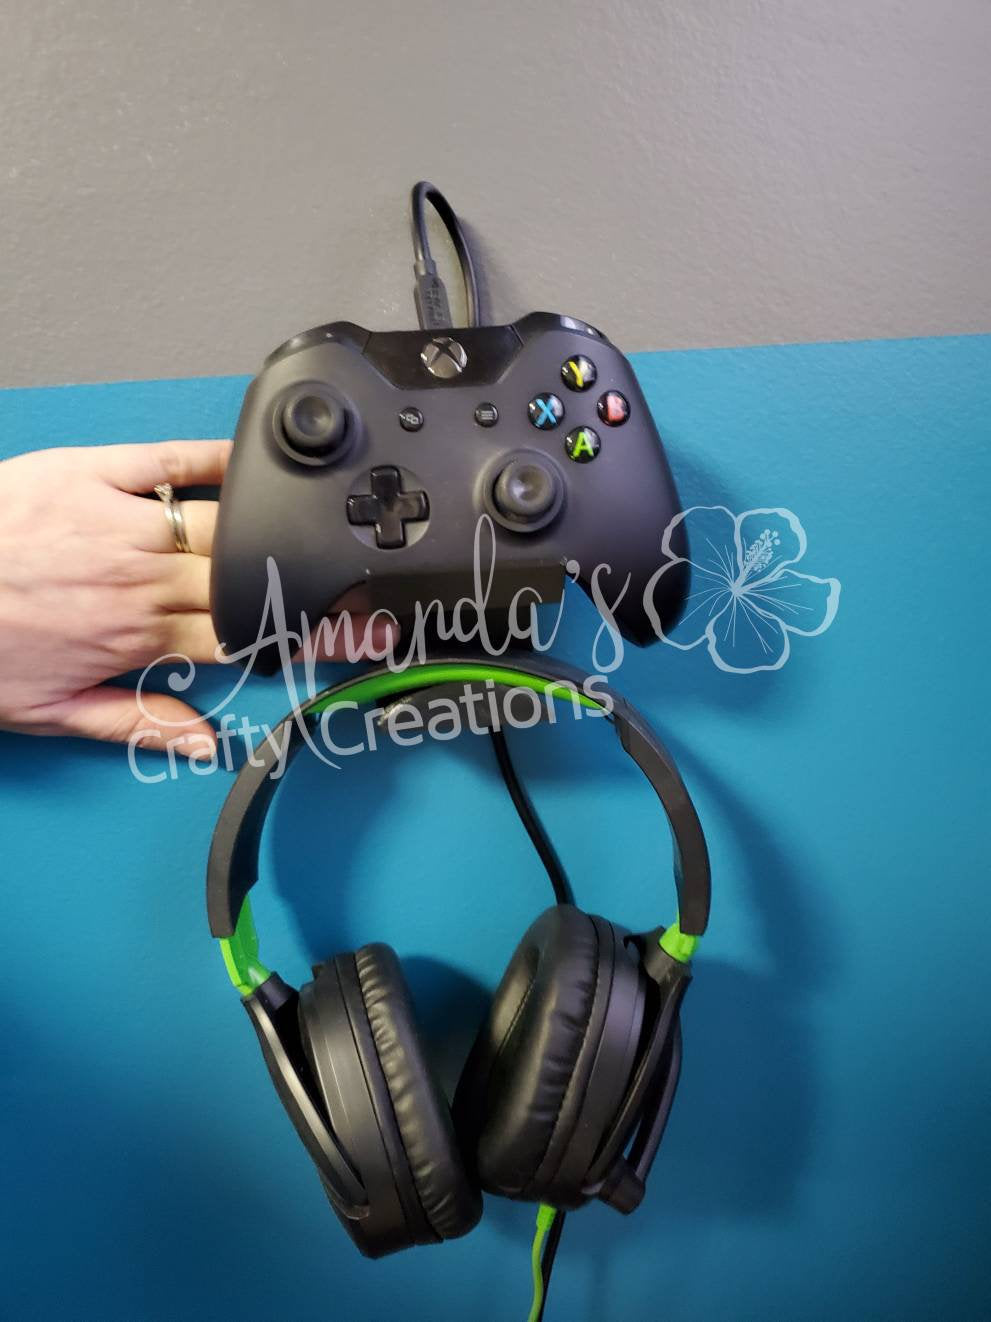 3d printed controller and headphone holder